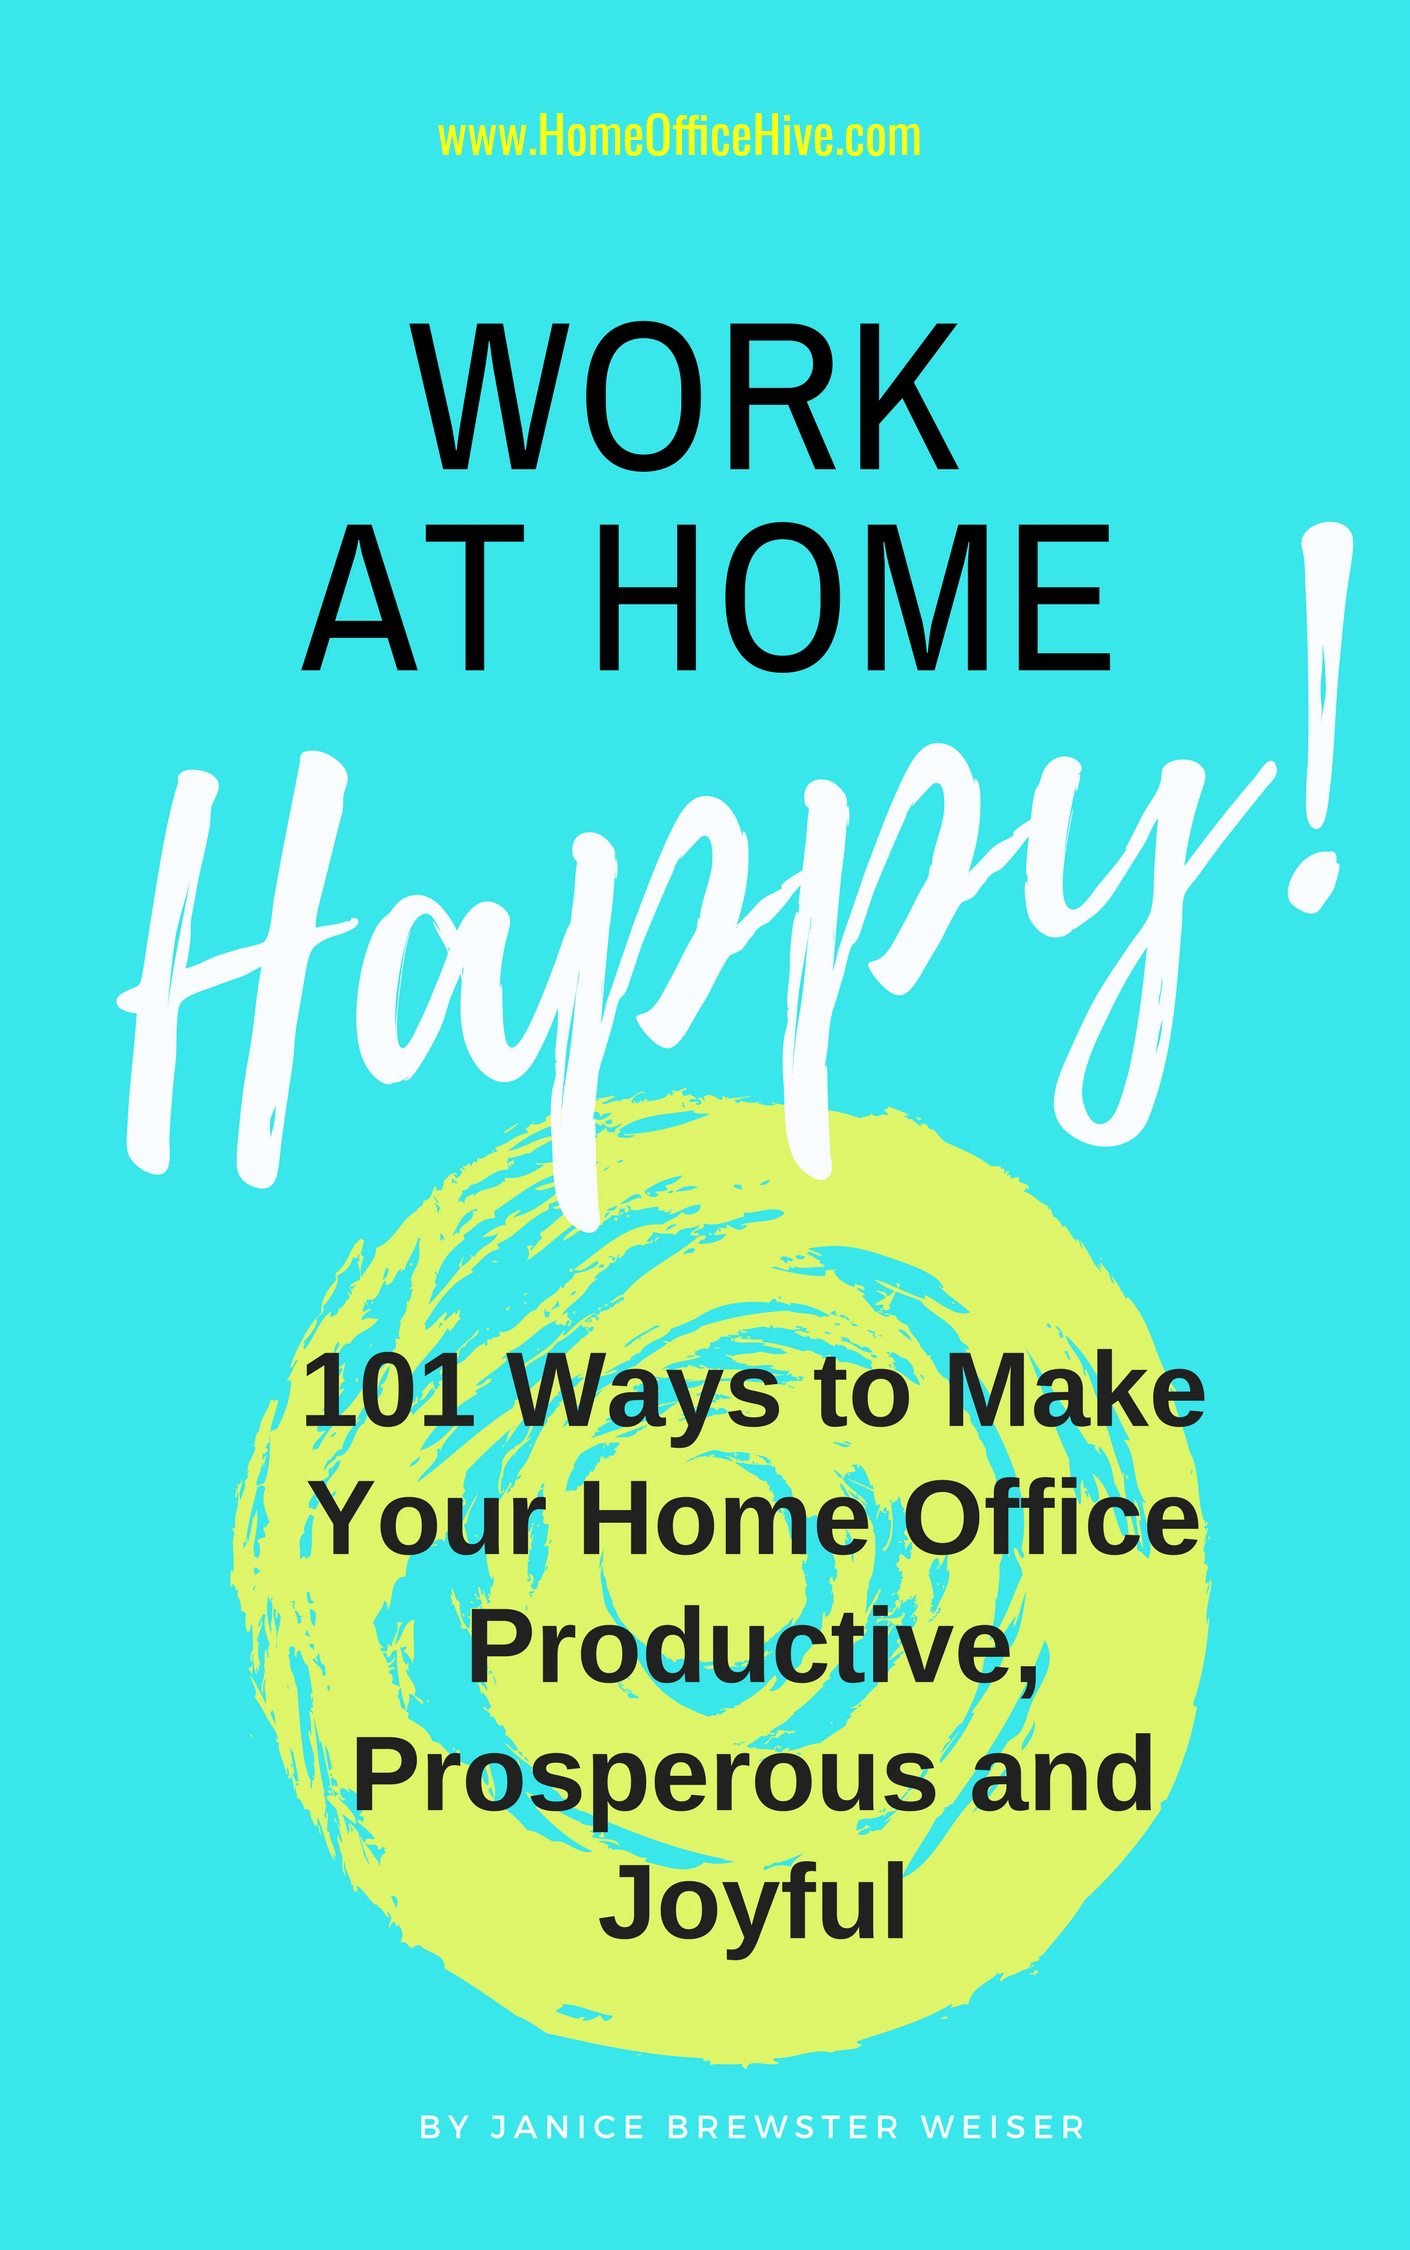 Work at Home Happy: 101 ways to make your home office productive, prosperous and joyful